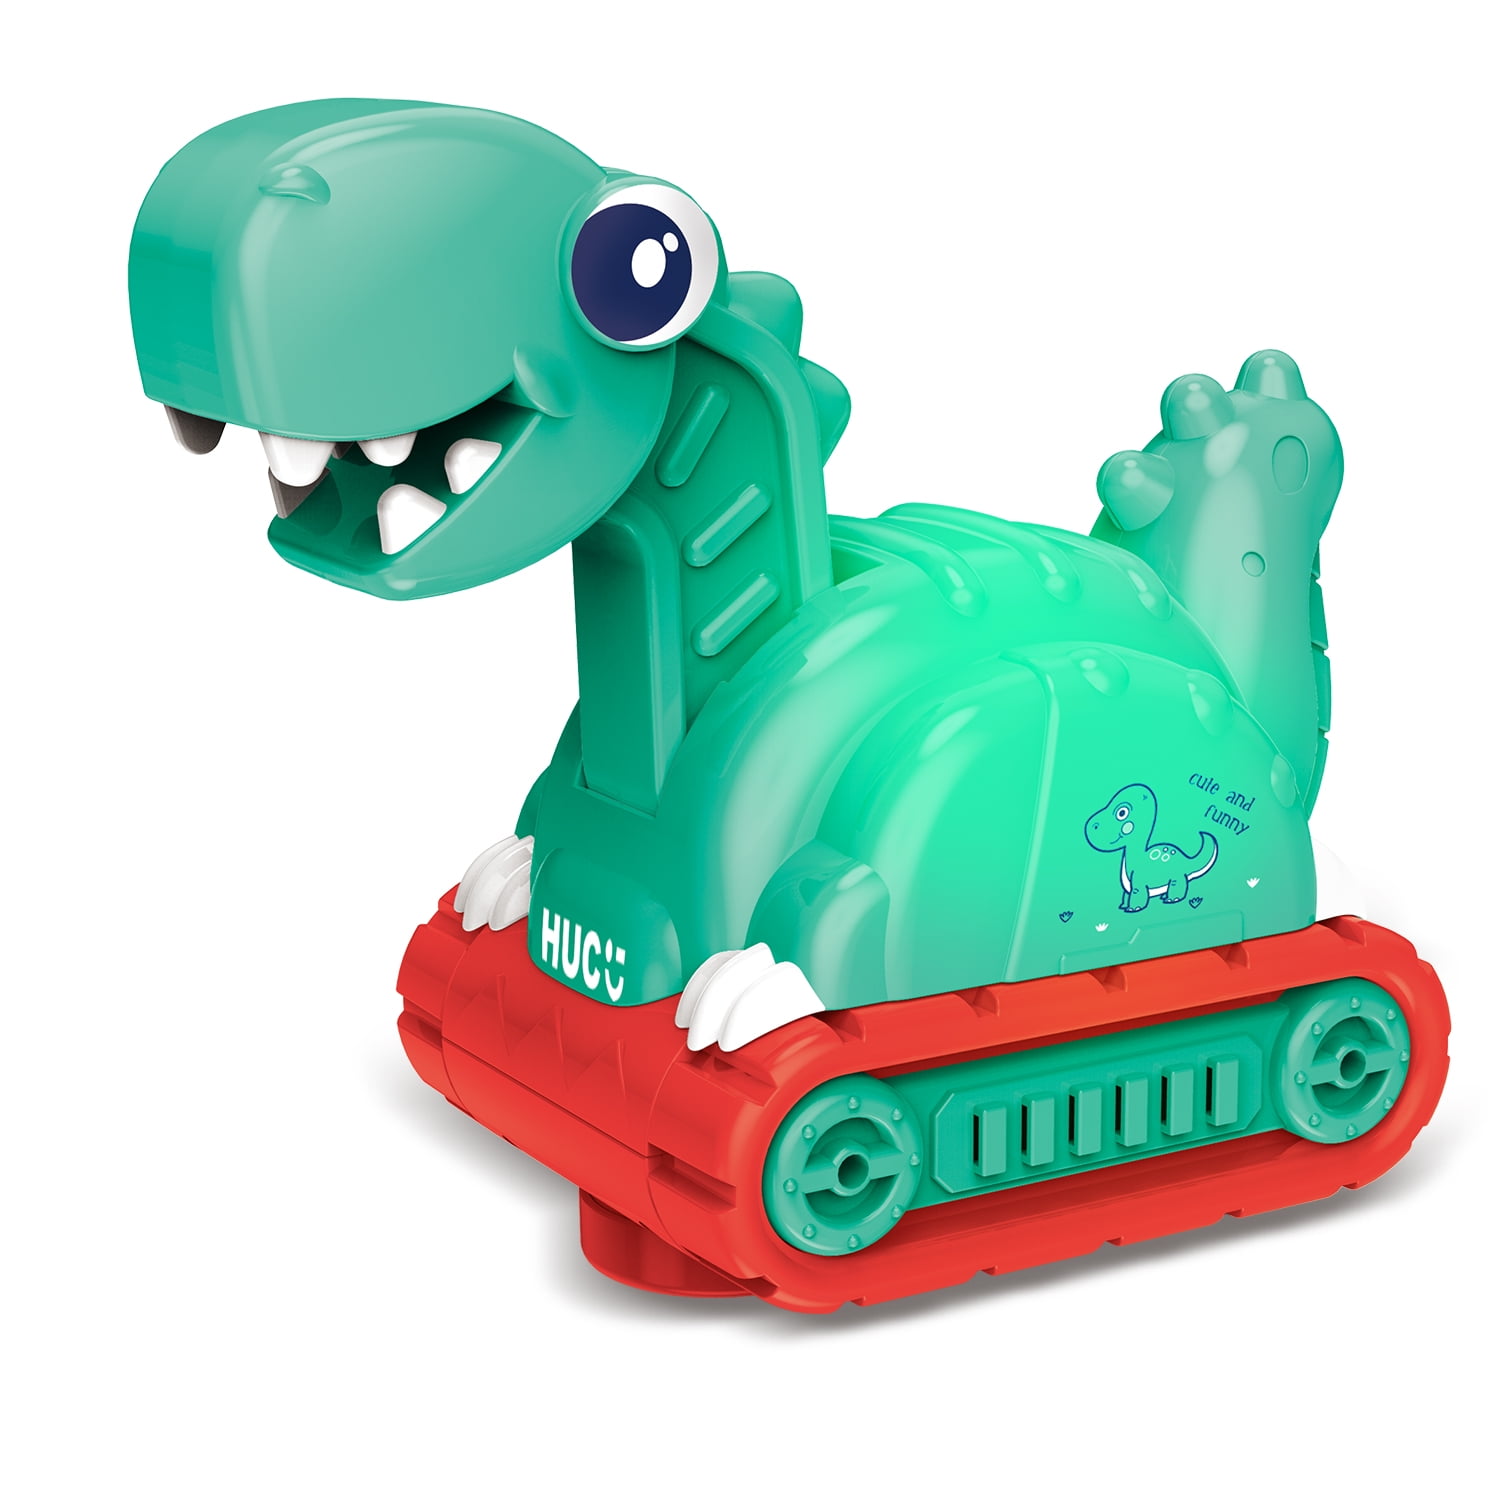 Cool Mist Spray Fun Kids Dinosaur Toy with Light & Sound Dinosaur Car Toys Dino Cars Vehicles Playset Toddler Infant Early Education for Boys and Girls 